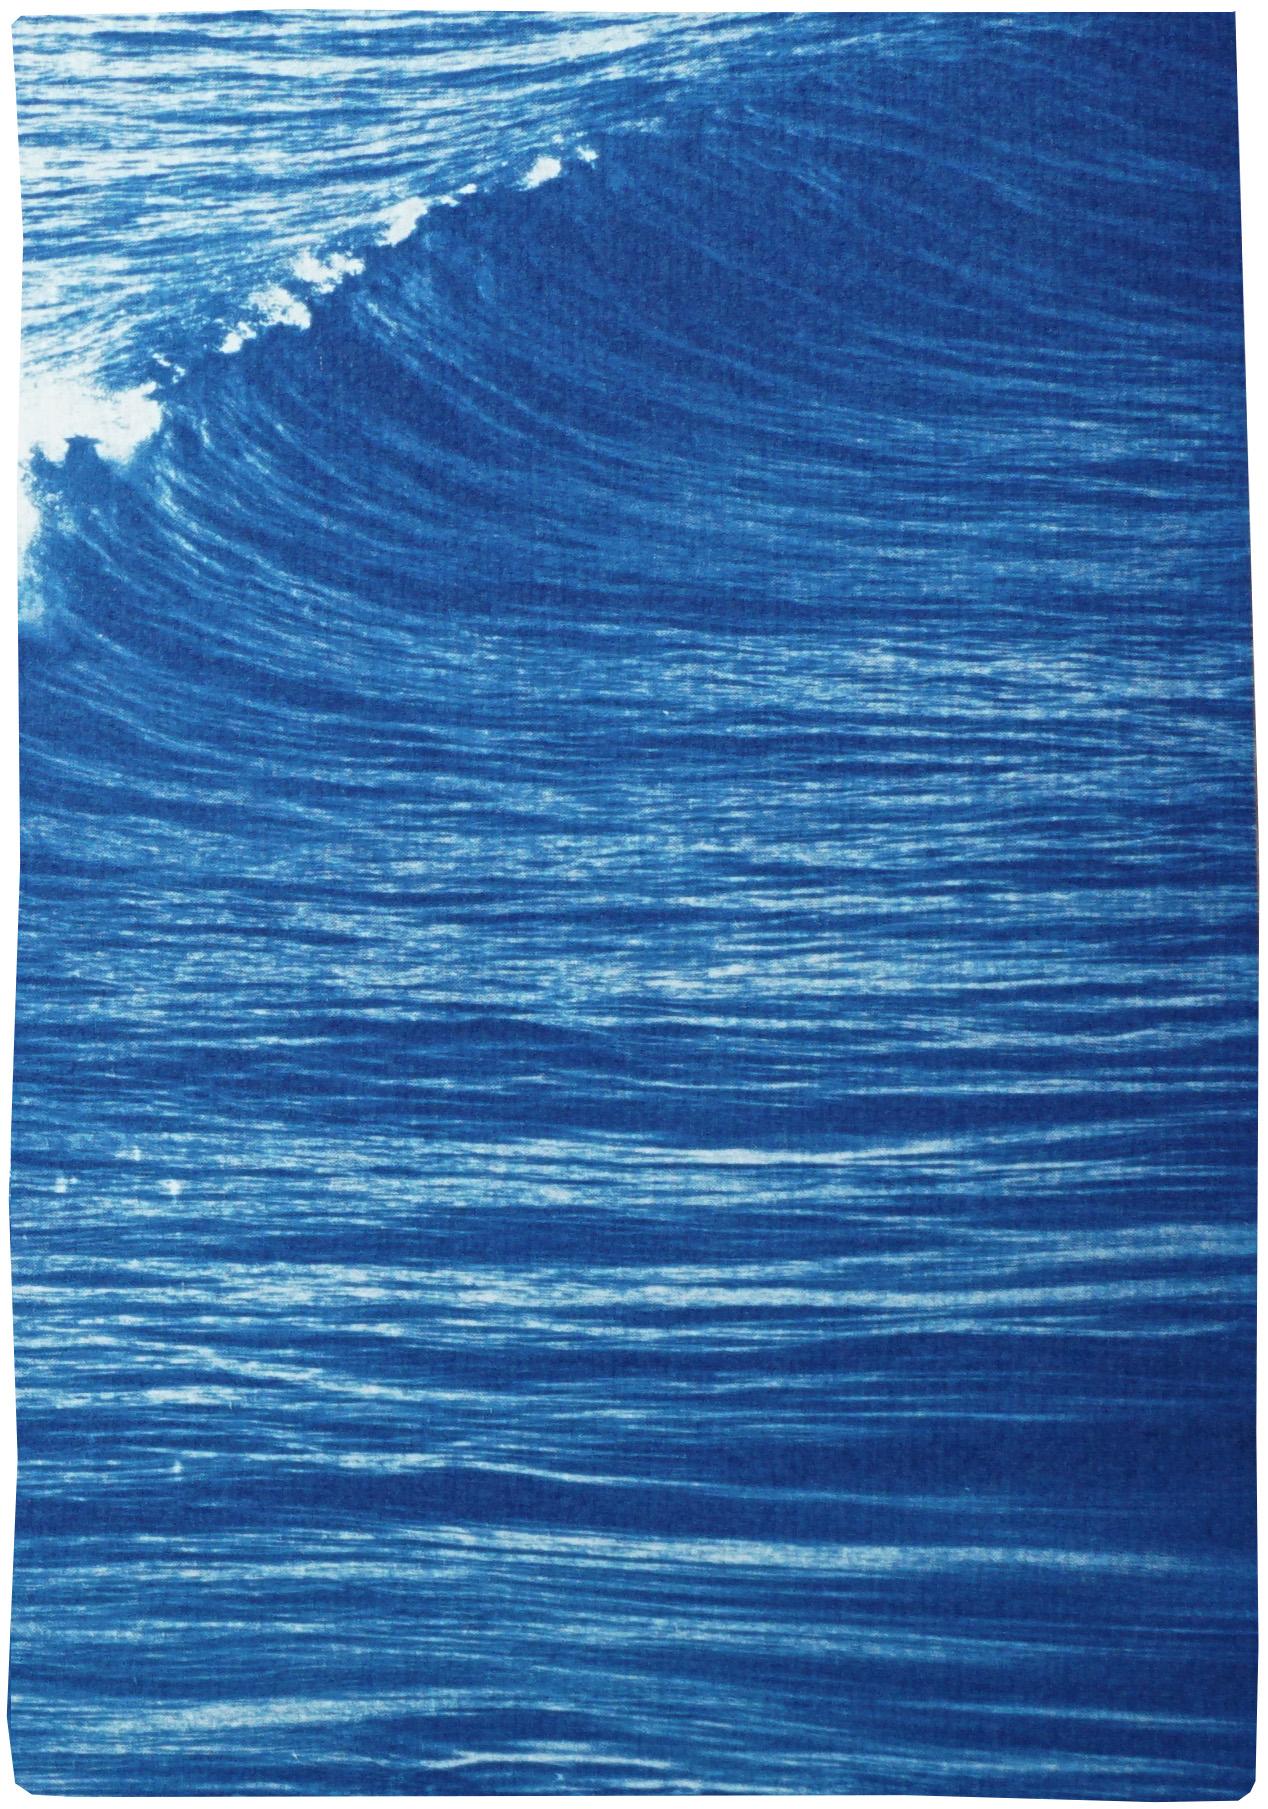 Colossal Seascape Triptych of Crashing Wave in Los Angeles, Exclusive Cyanotype 1